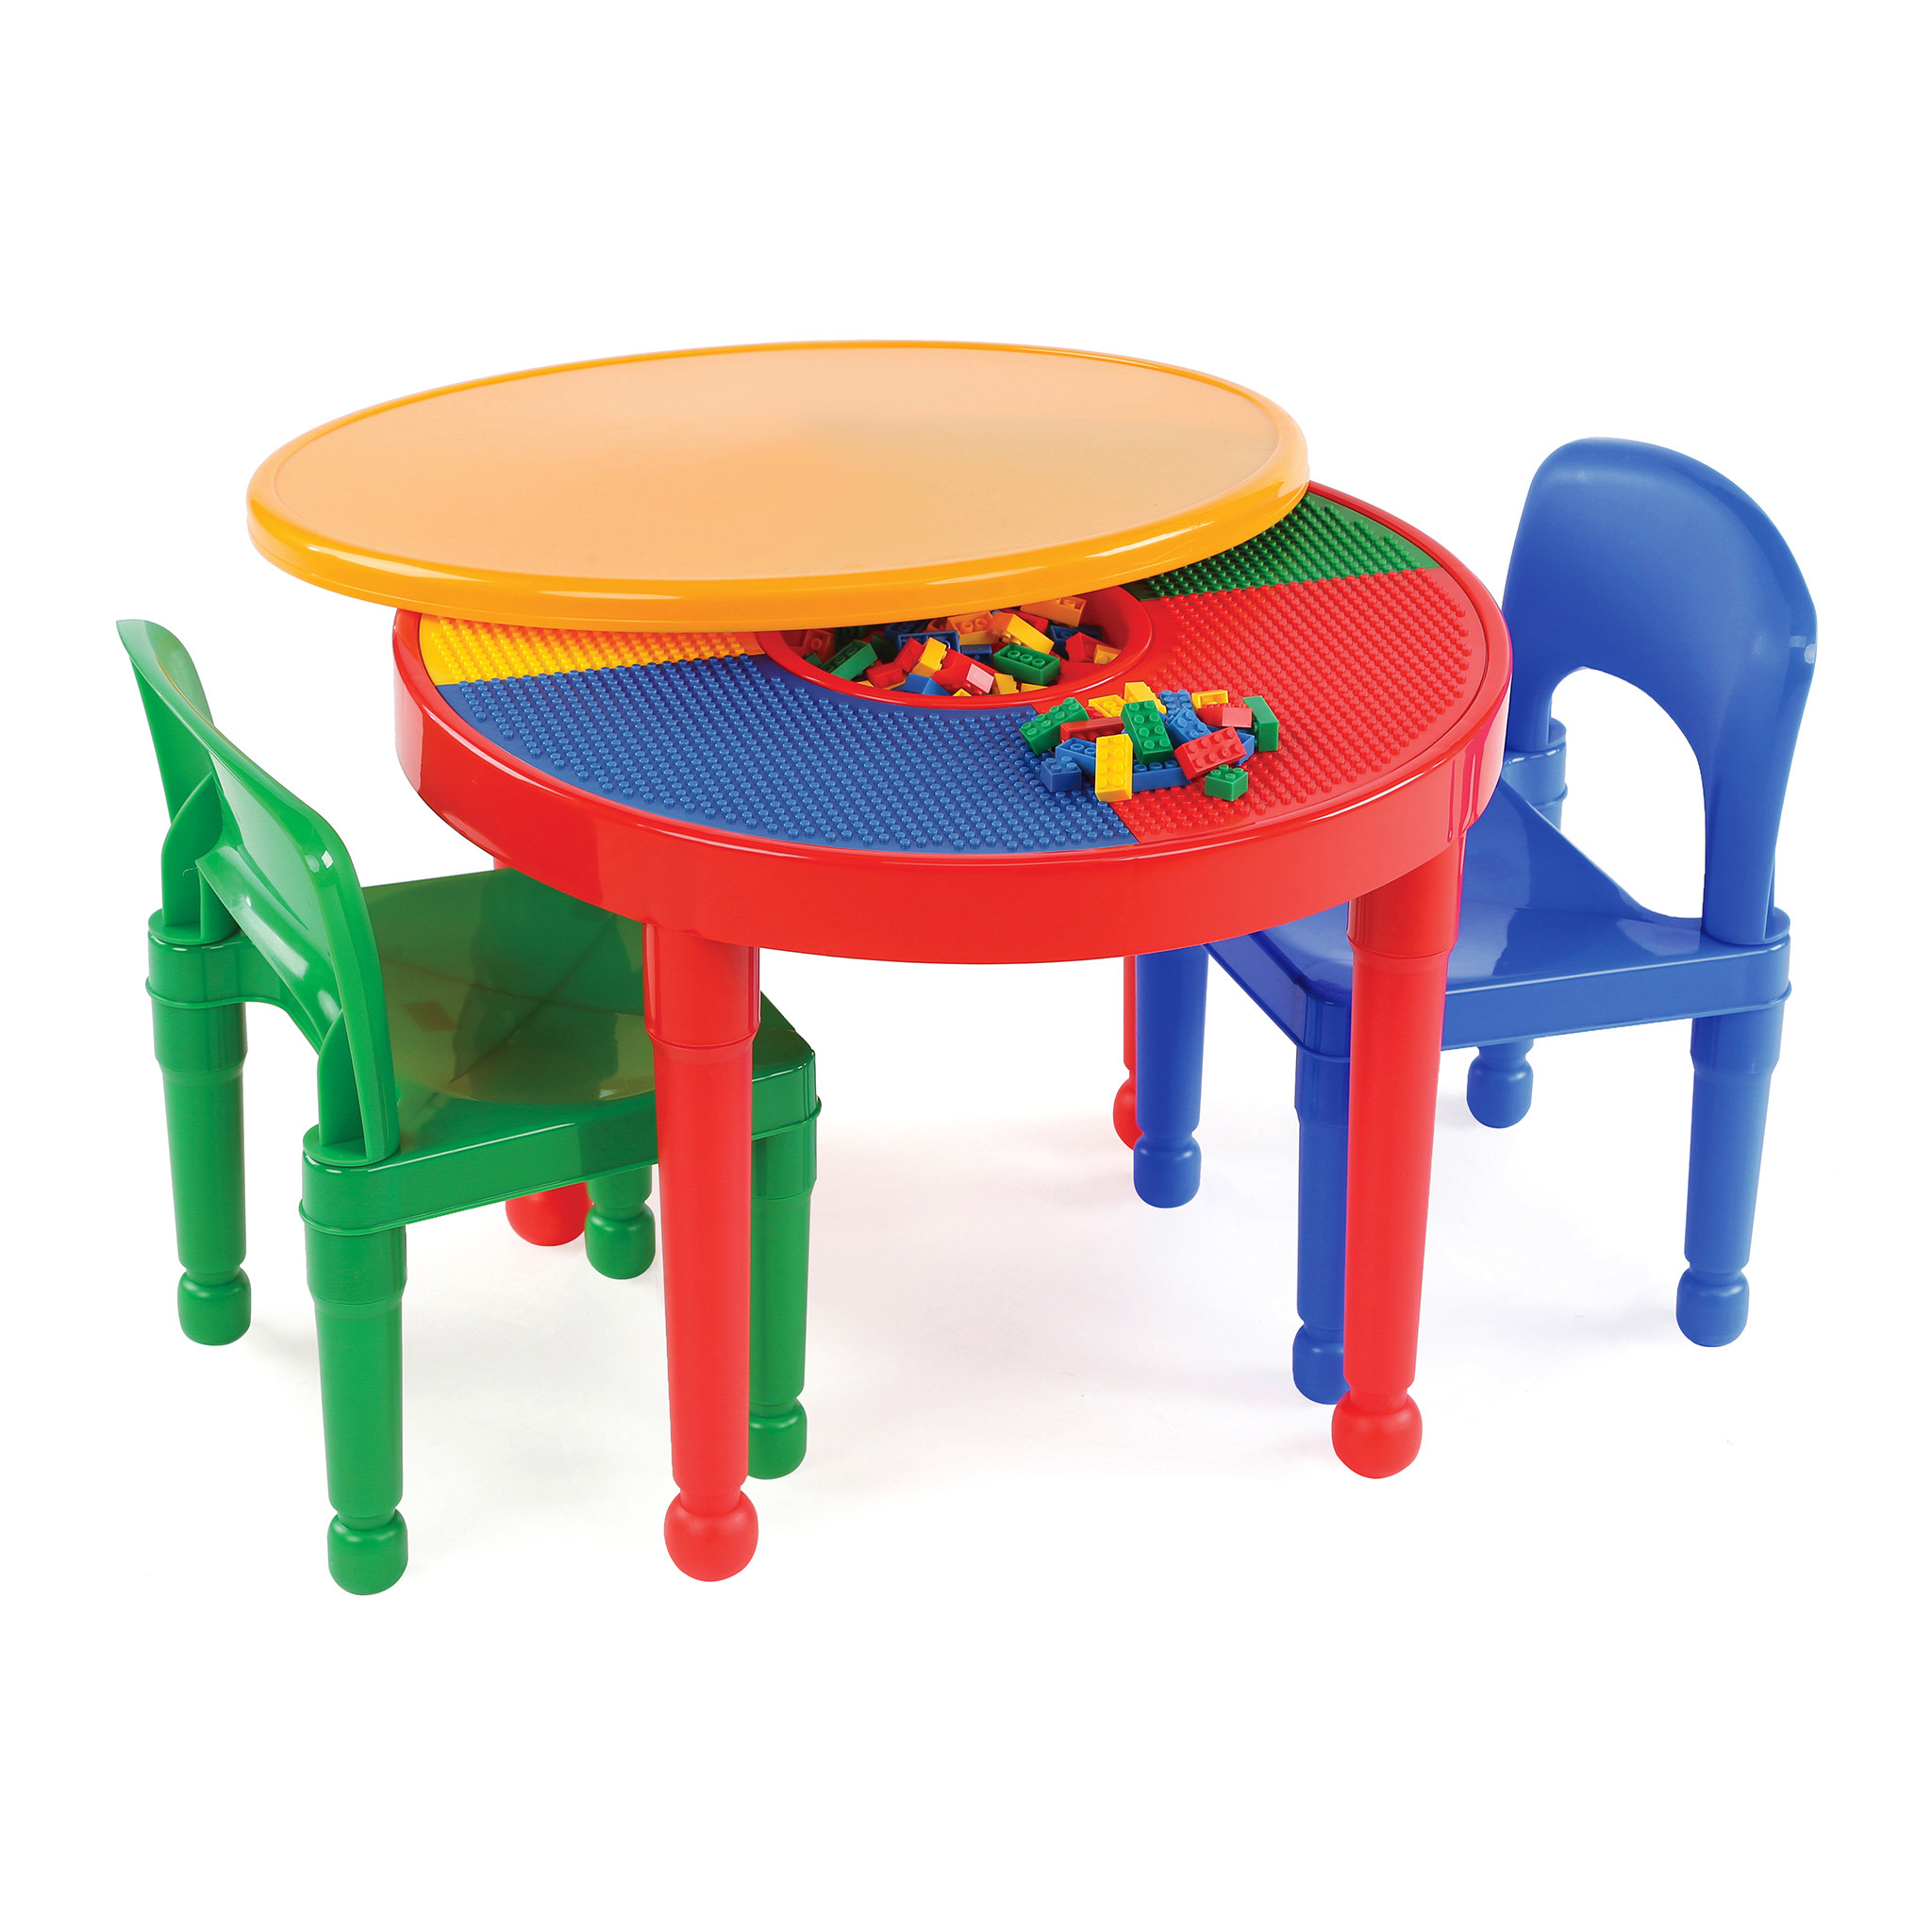 Kids Plastic Table And Chairs New Tot Tutors Kids 2 In 1 Plastic Lego Patible Activity Of Kids Plastic Table And Chairs 1 